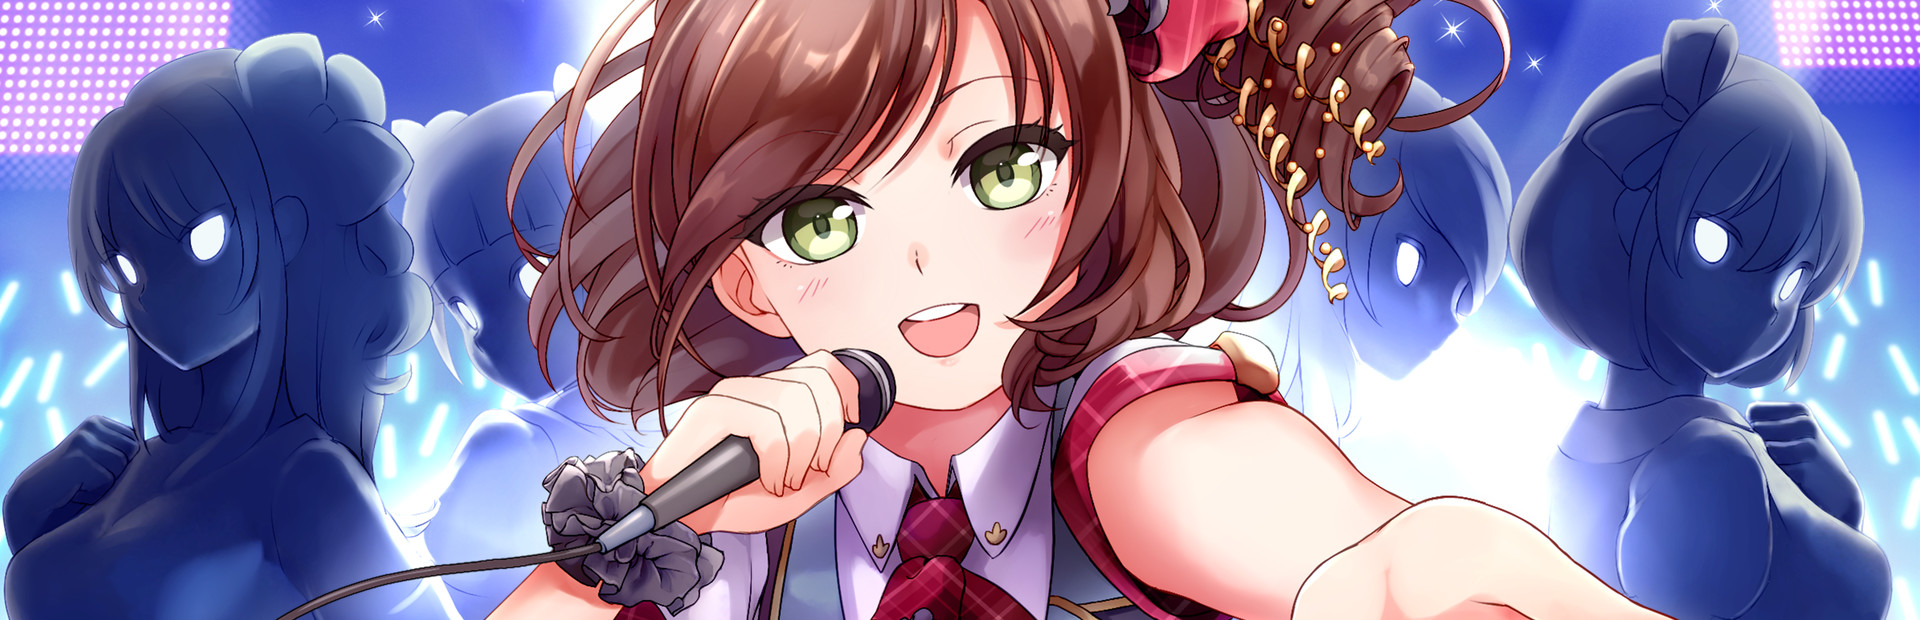 Idol Manager cover image